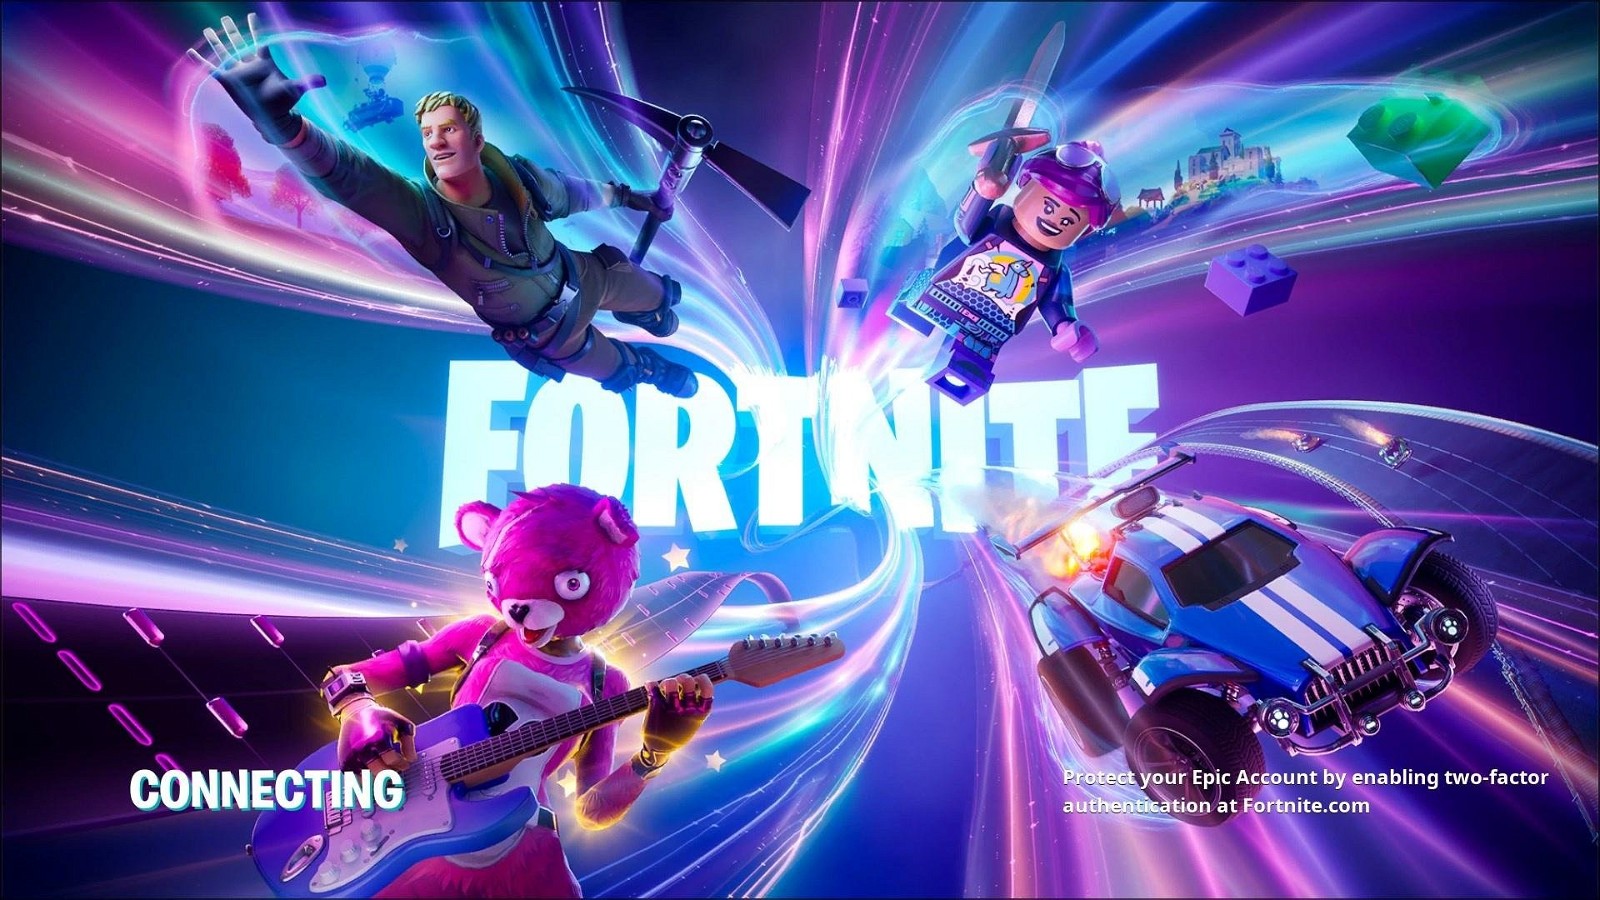 Fortnite popularised the phrase "Where we dropping boys?"